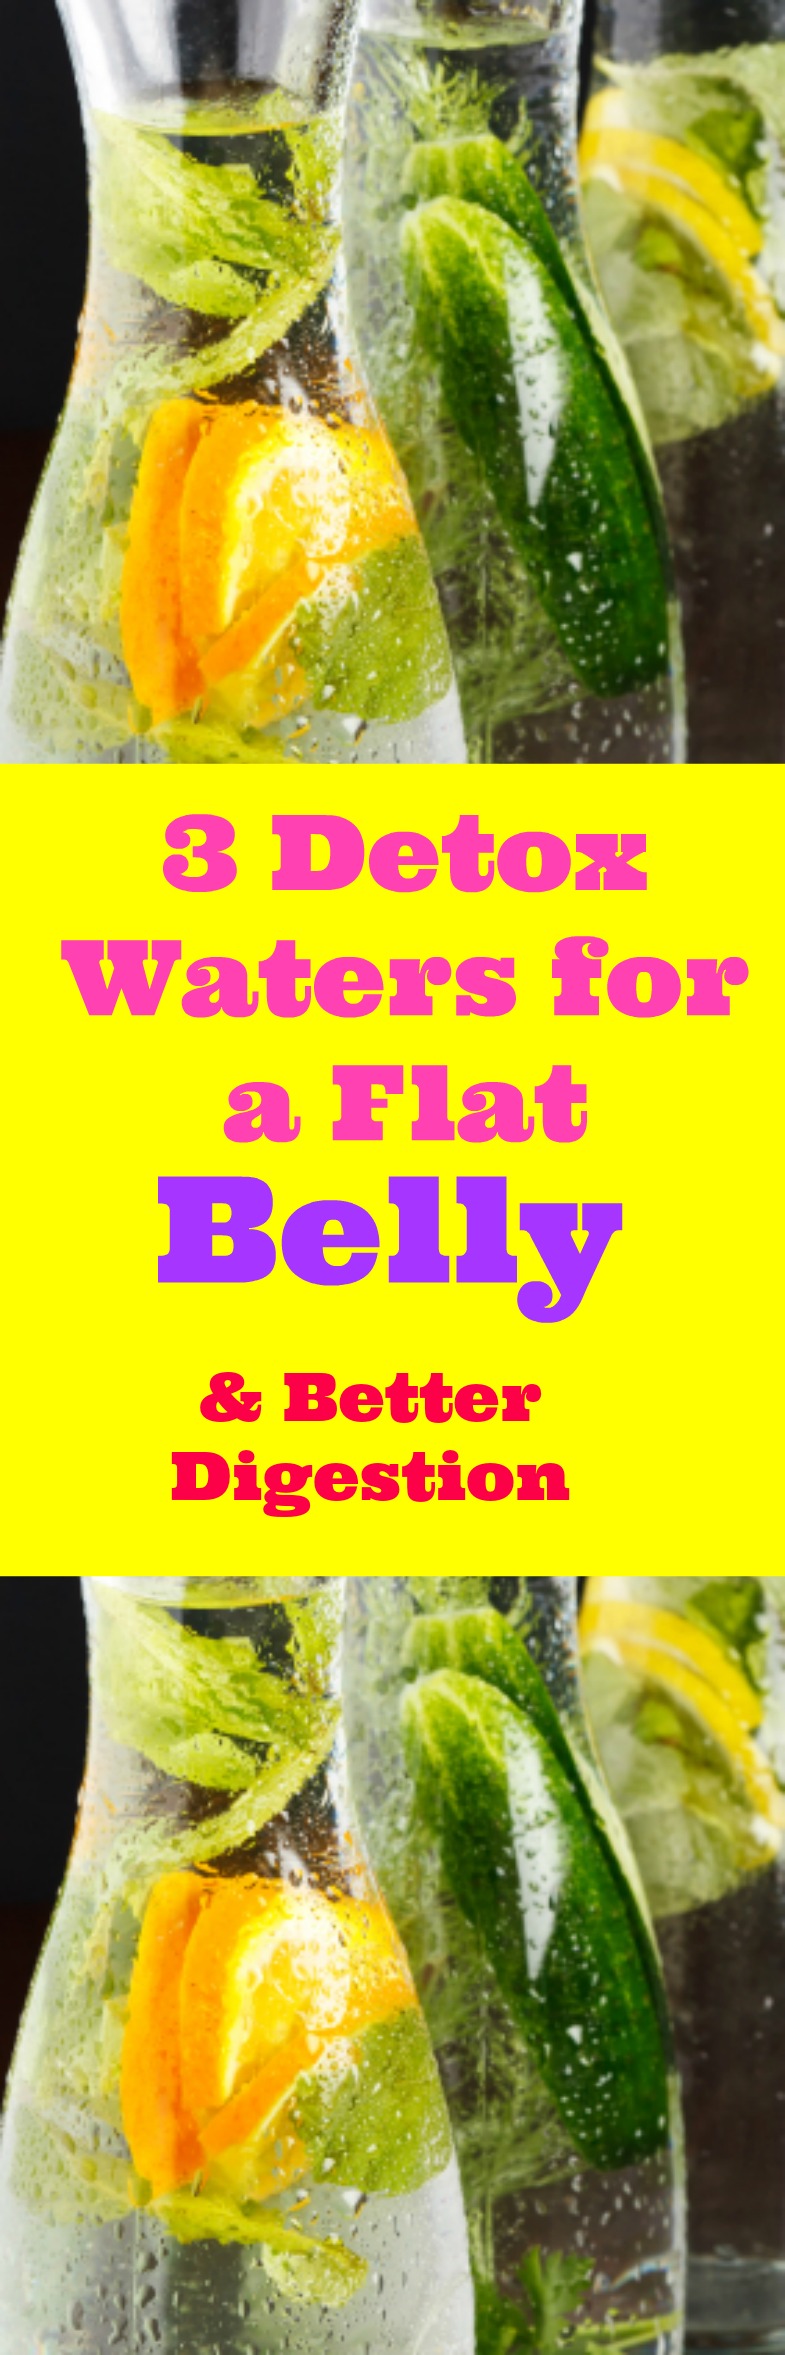 3 Detox drinks to rid you of belly bloat. How to get a fat stomach when you hydrate with infused detox water. Lose weight and debloat with beneficial ingredients.